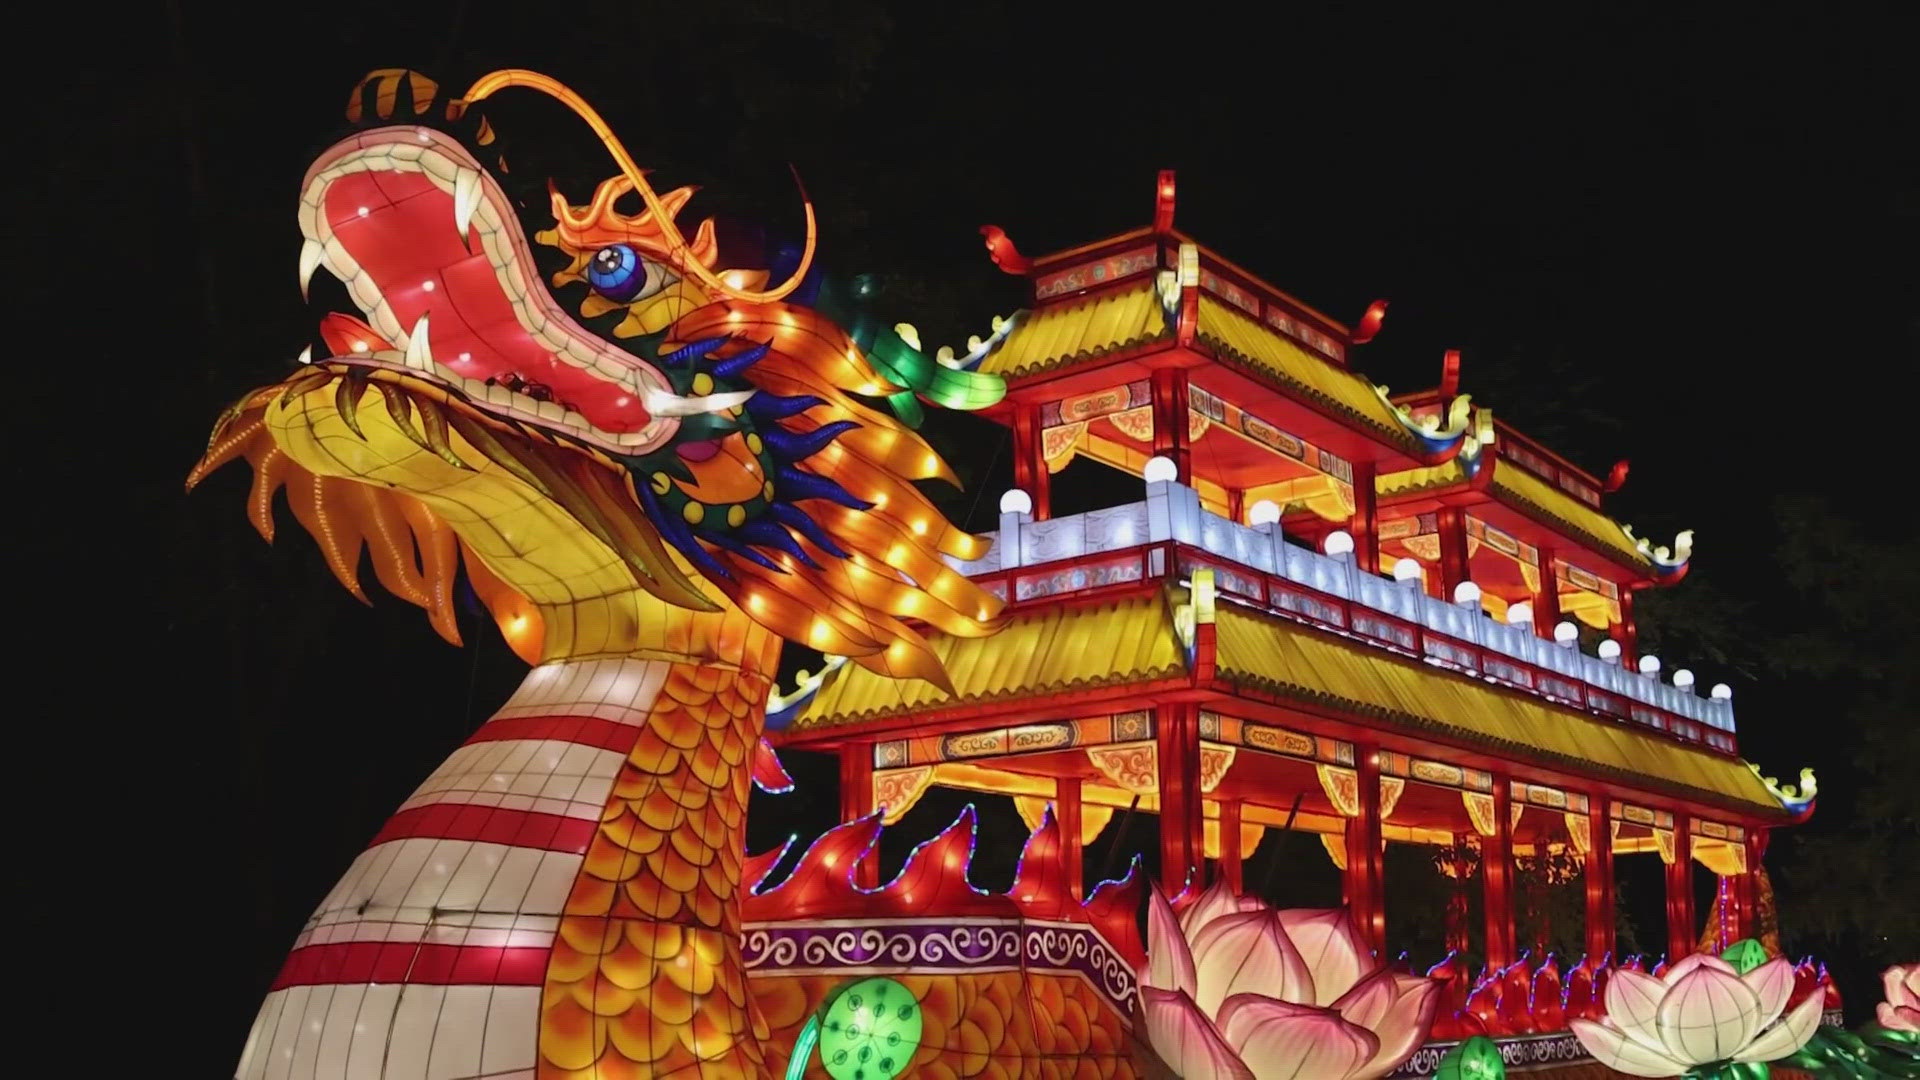 It's back! The Asian Lantern Festival makes its return to the Cleveland Zoo from July 5 through Aug. 25.